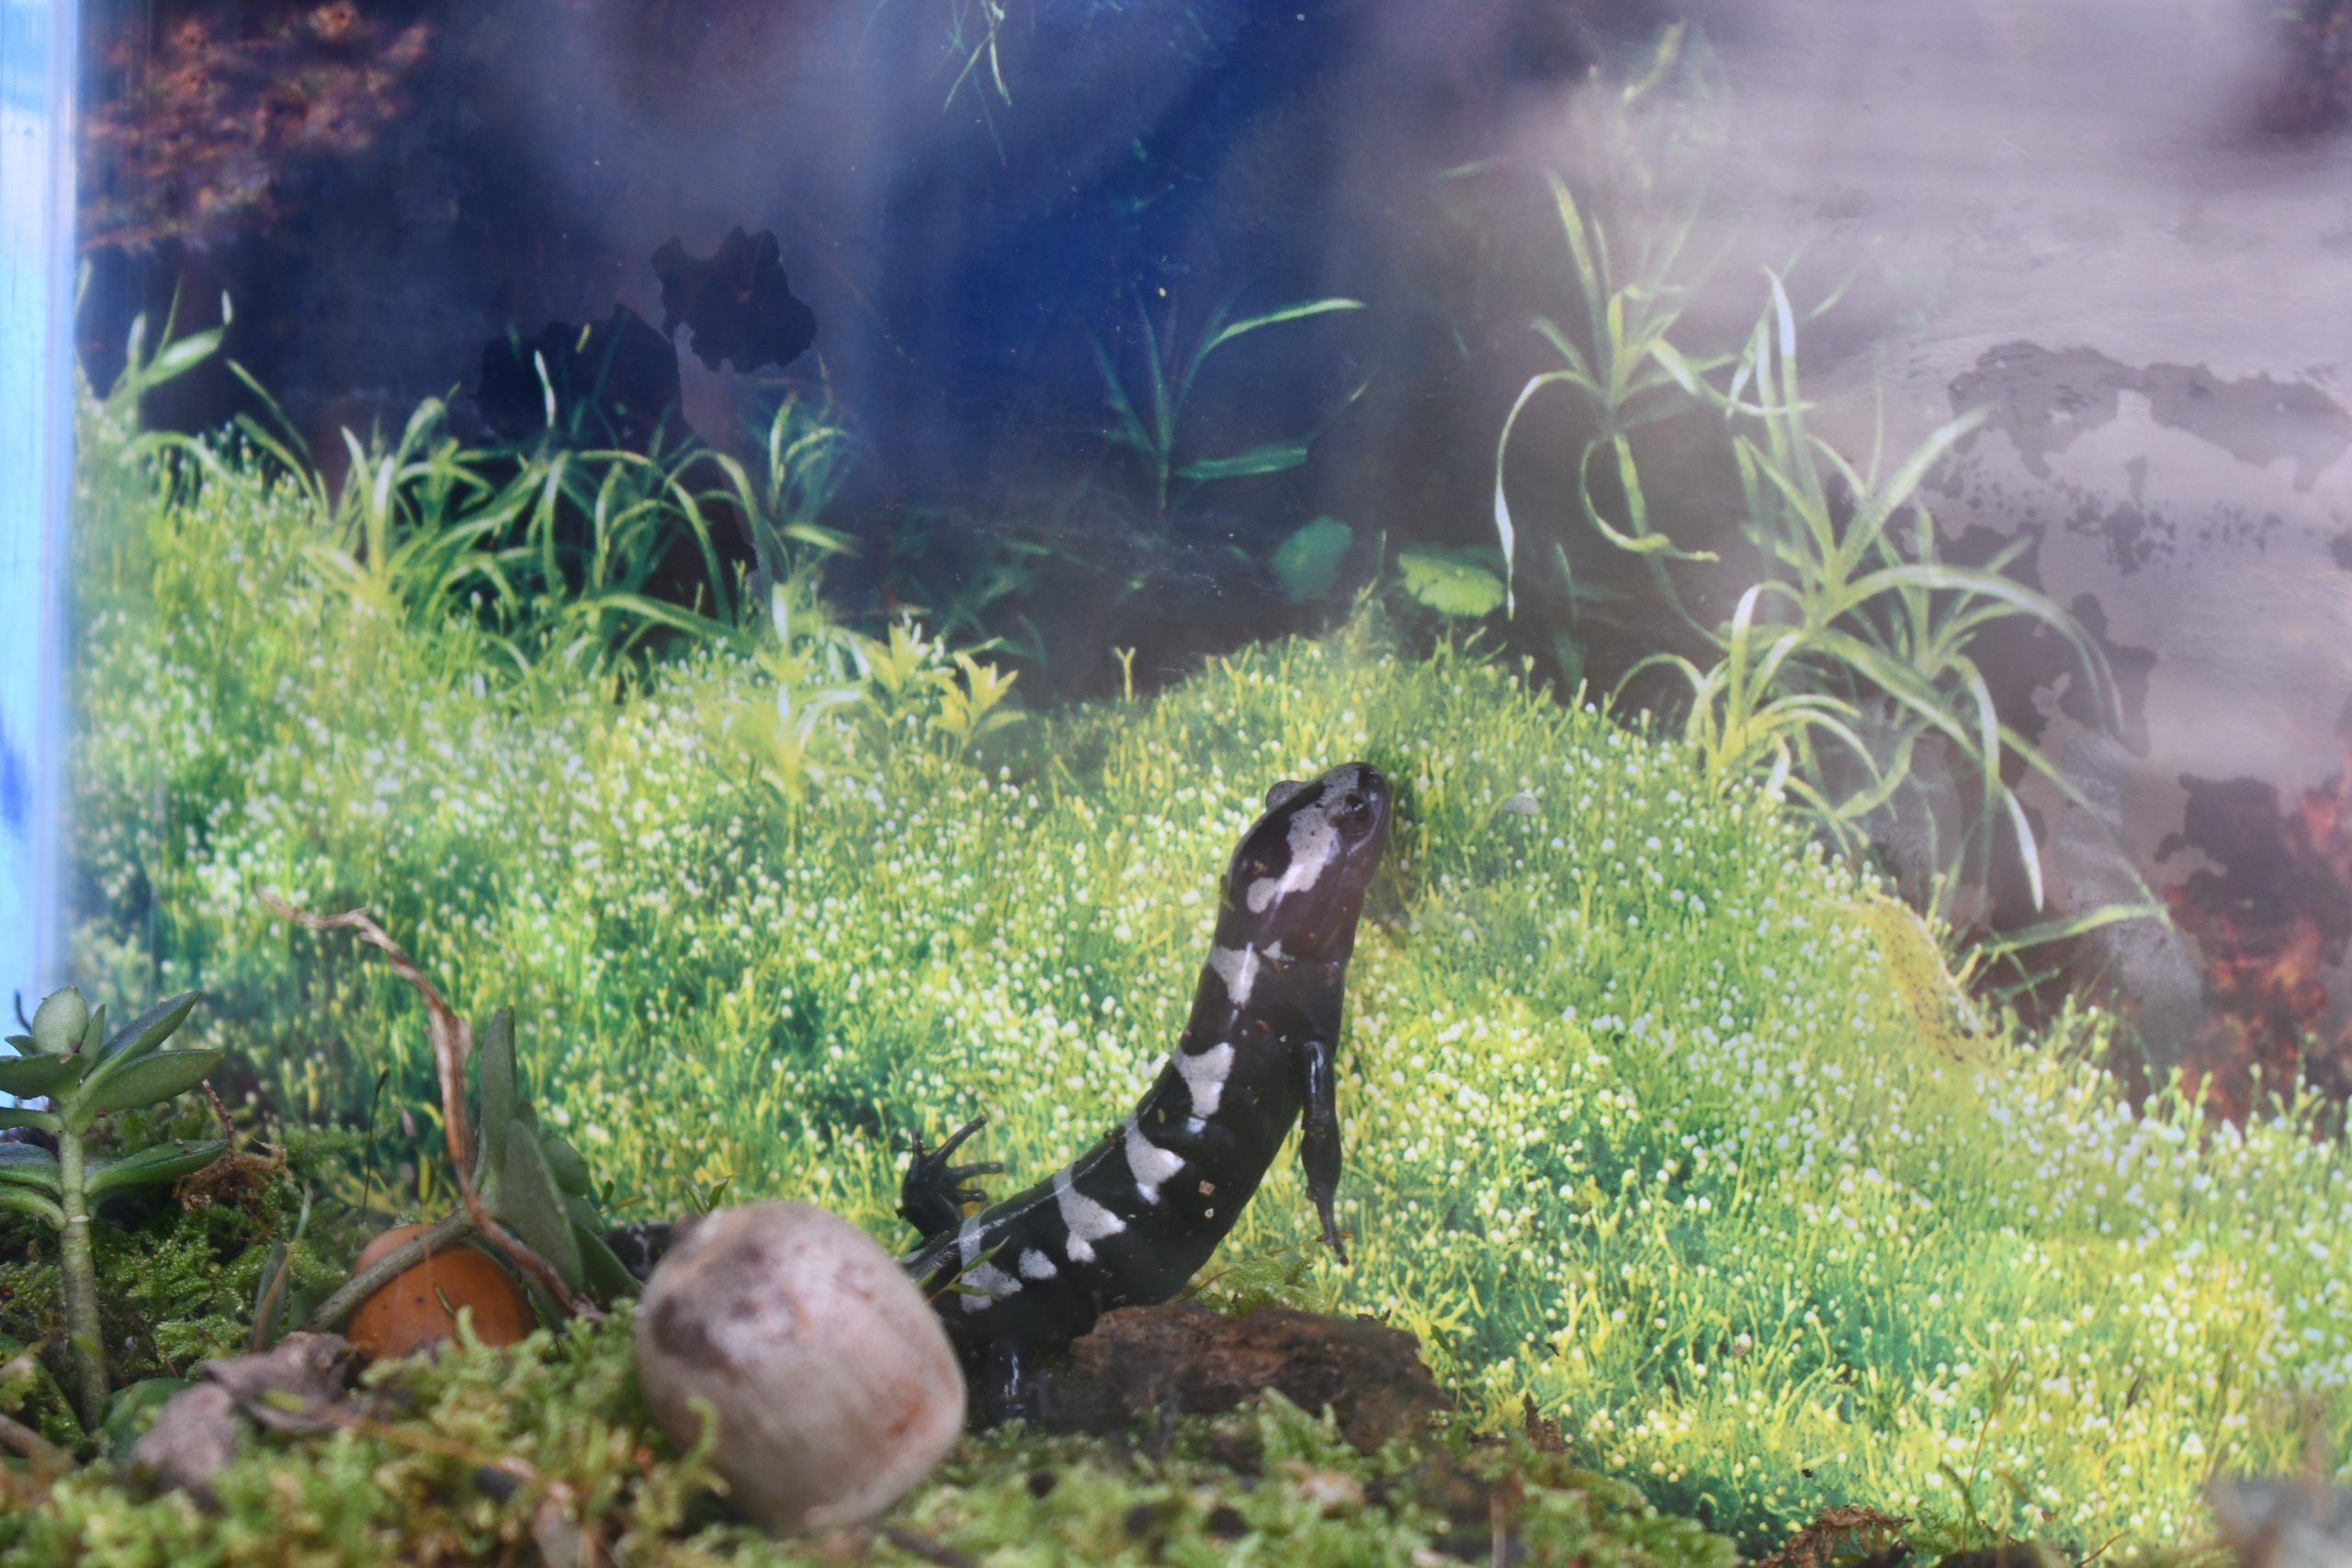 A black salamander with yellow chevrons down its back attempts to scale the wall of its tank.